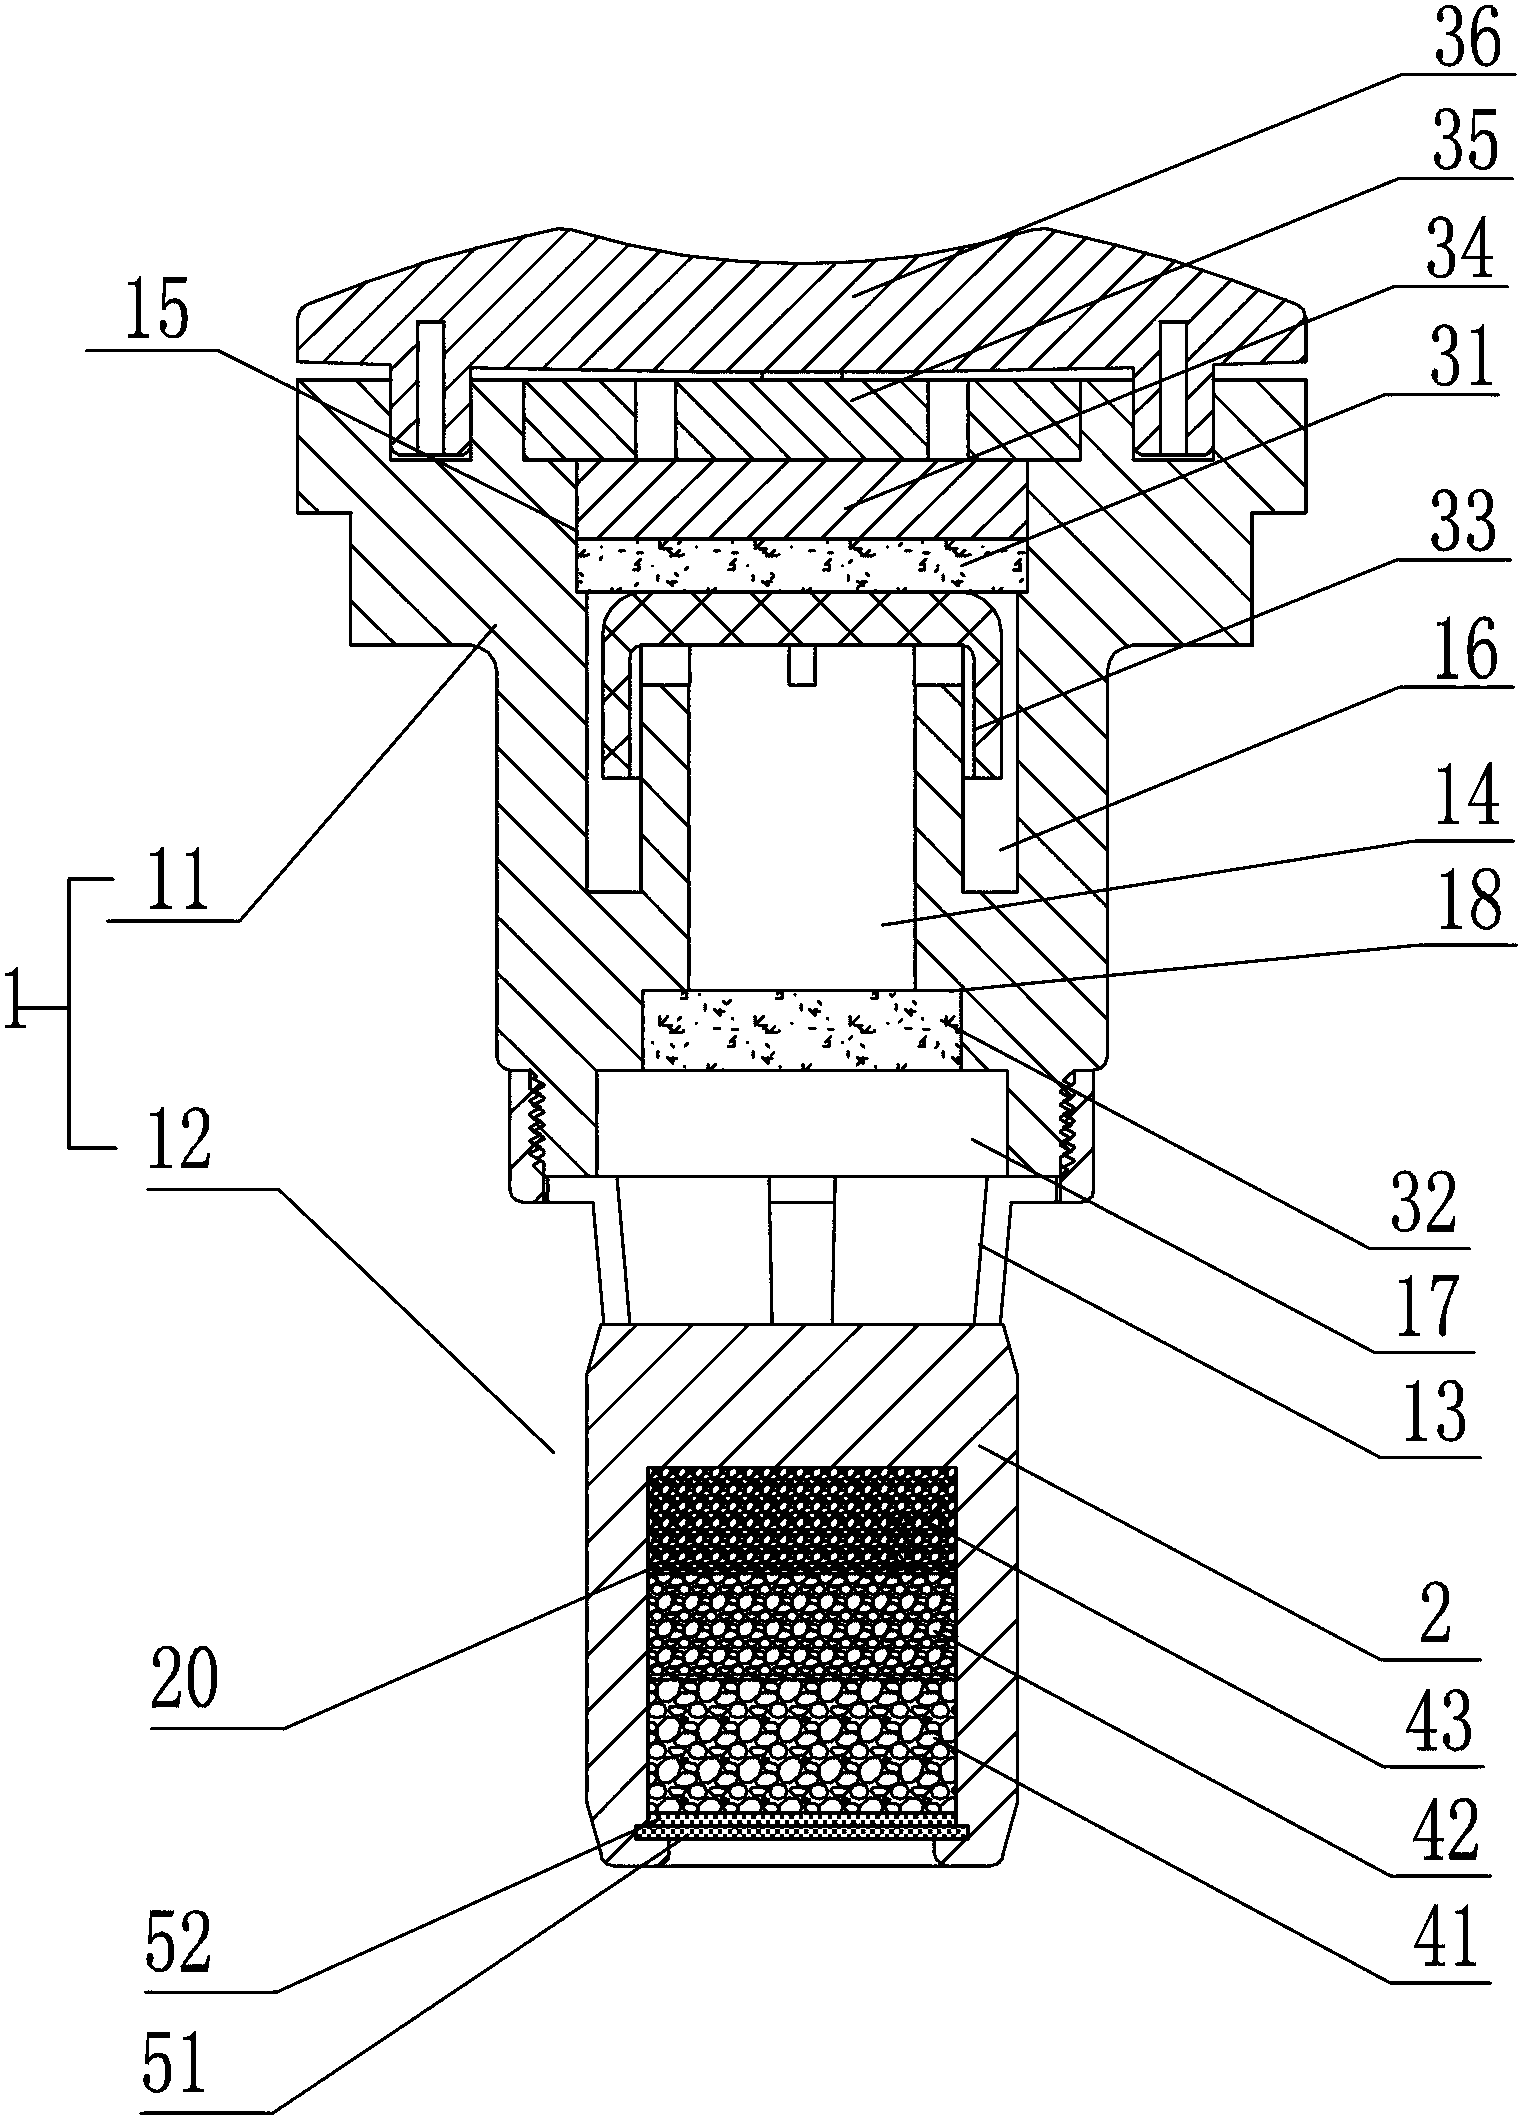 Safety catalyzing valve for lead-acid storage battery